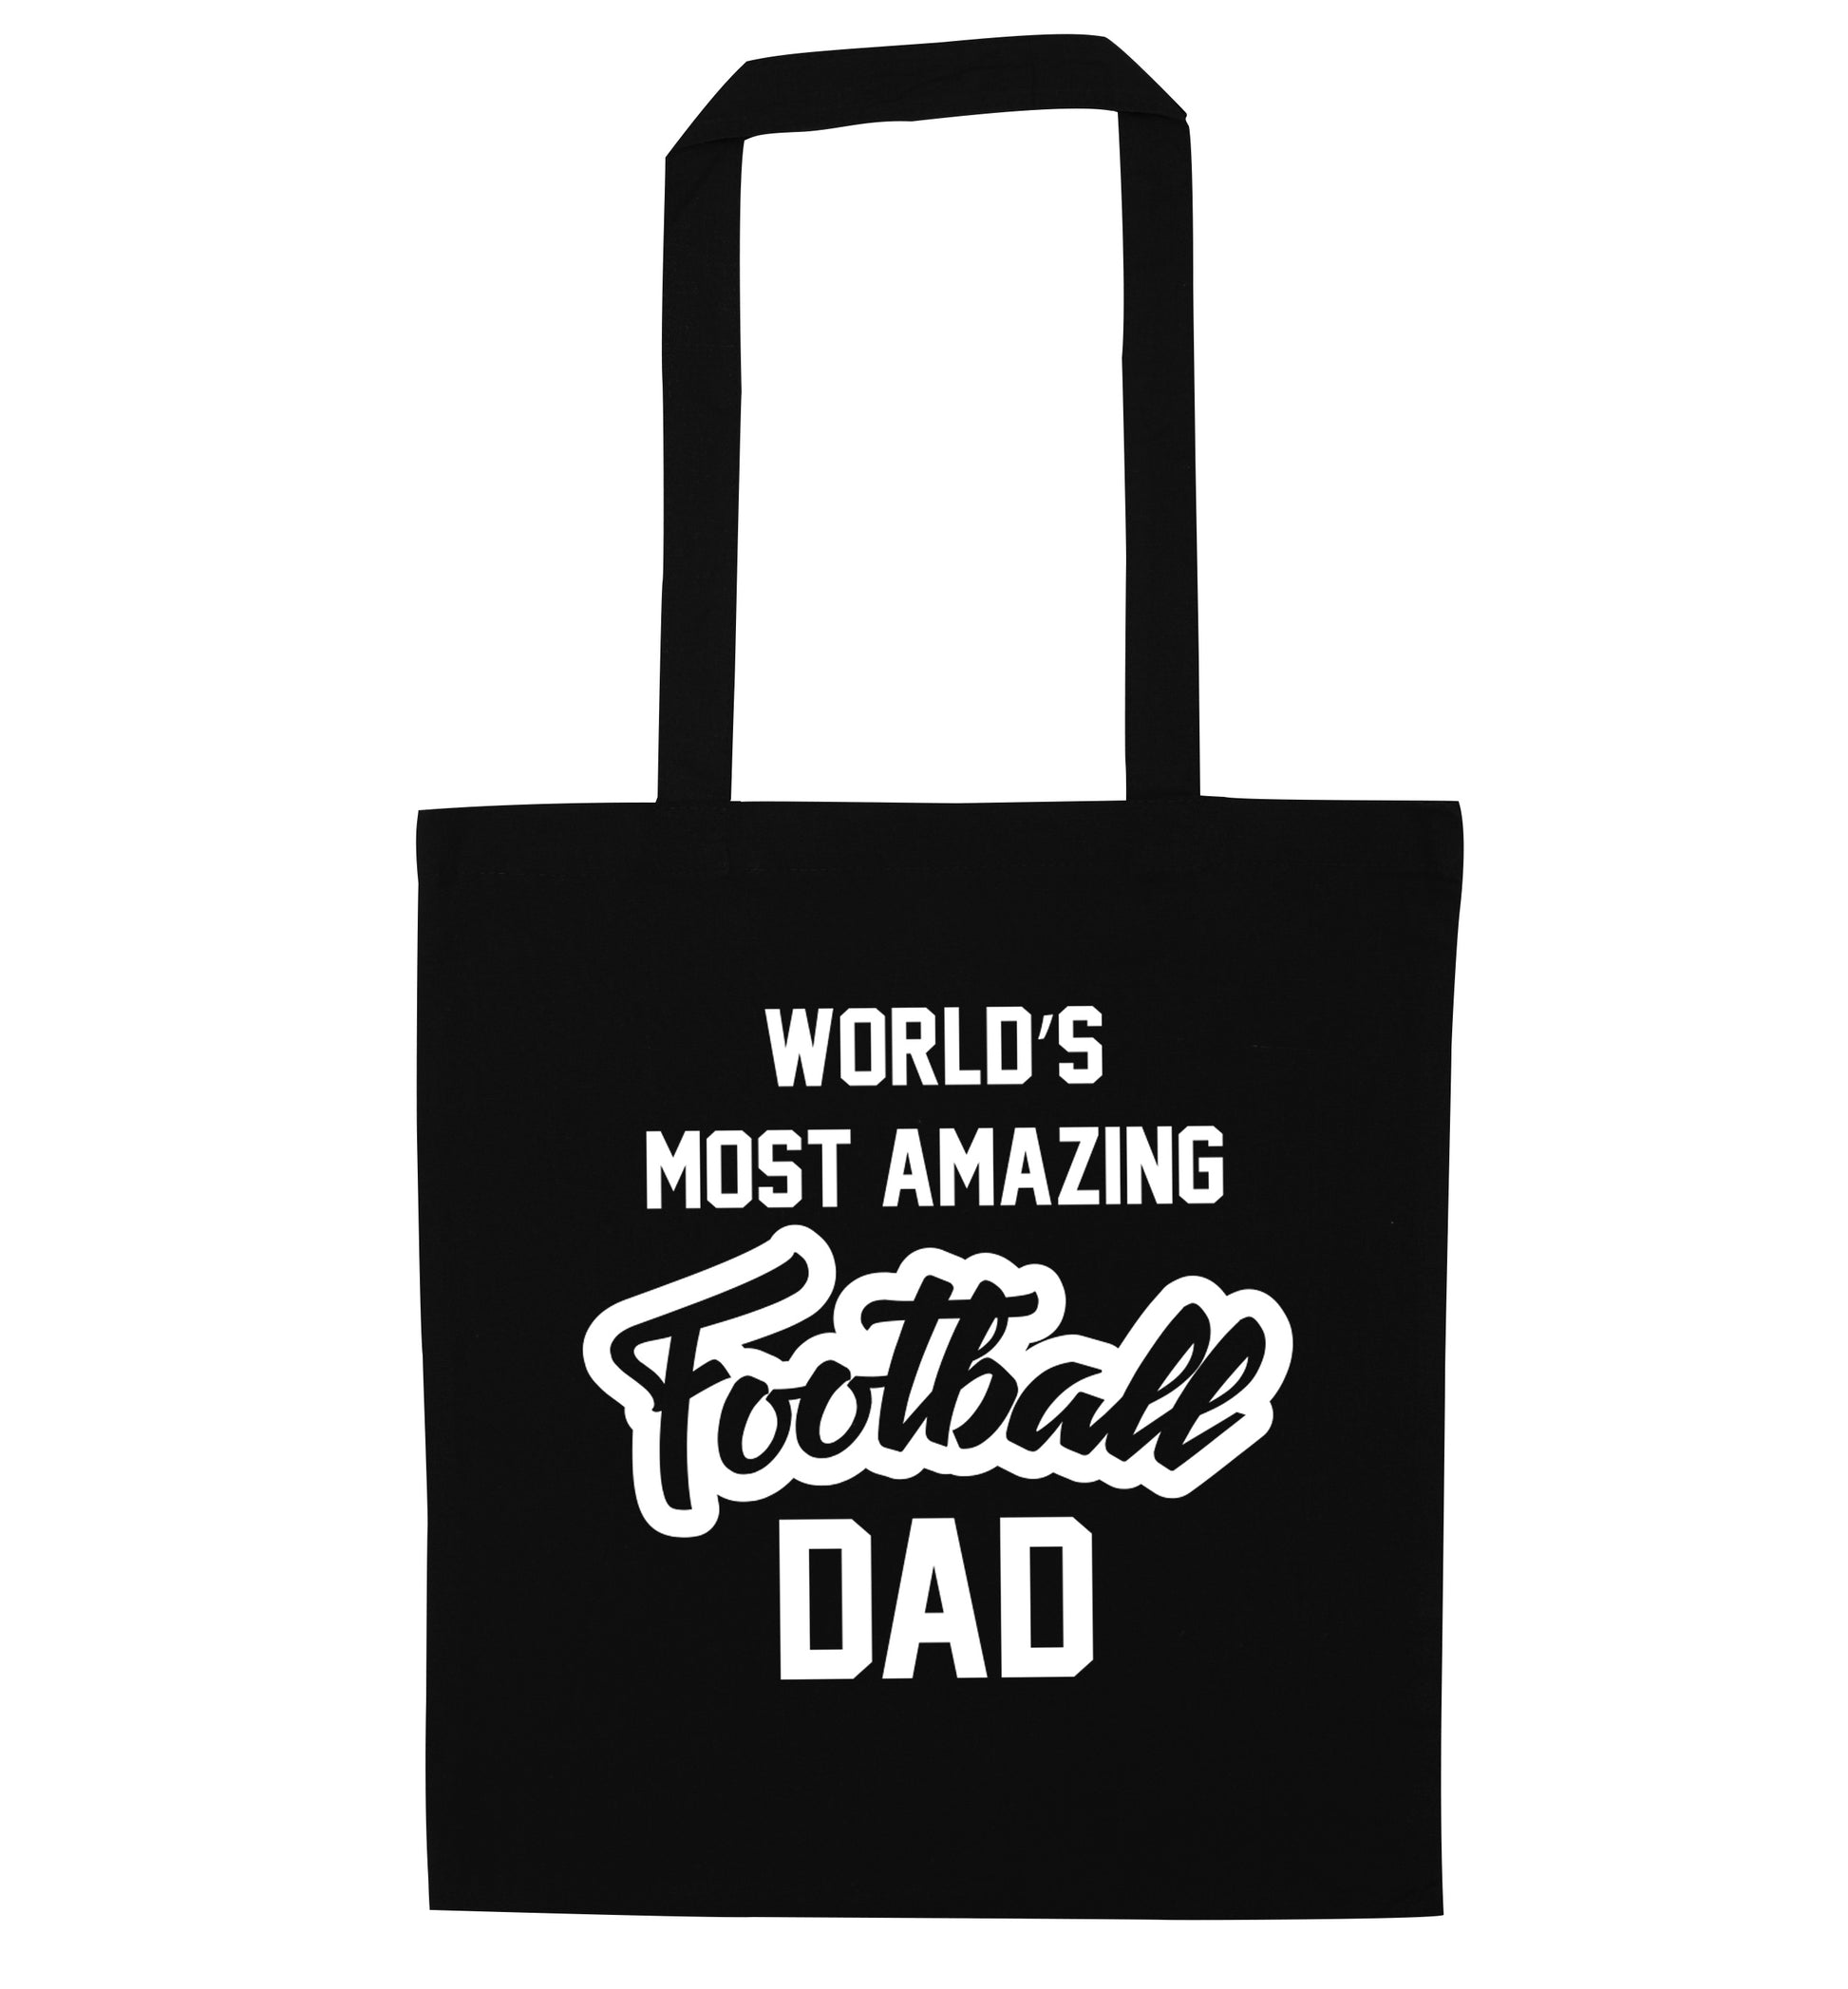 Worlds most amazing football dad black tote bag